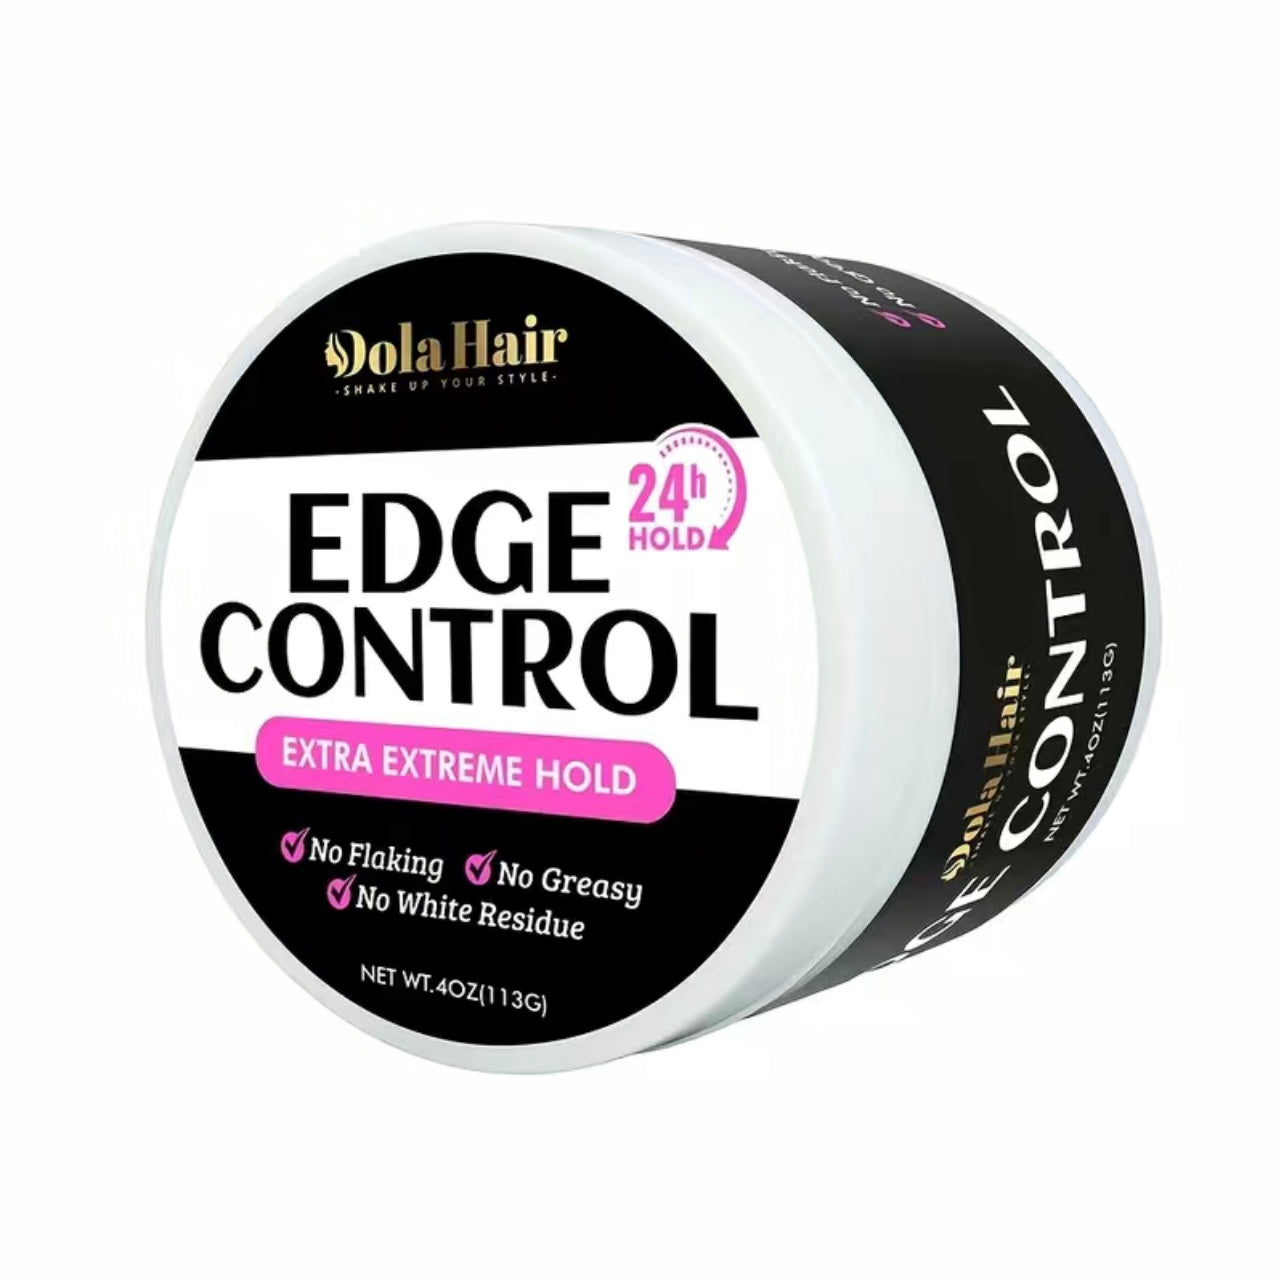 24 Hour Extra Hold Edge Control Styling Kit- Salon Quality